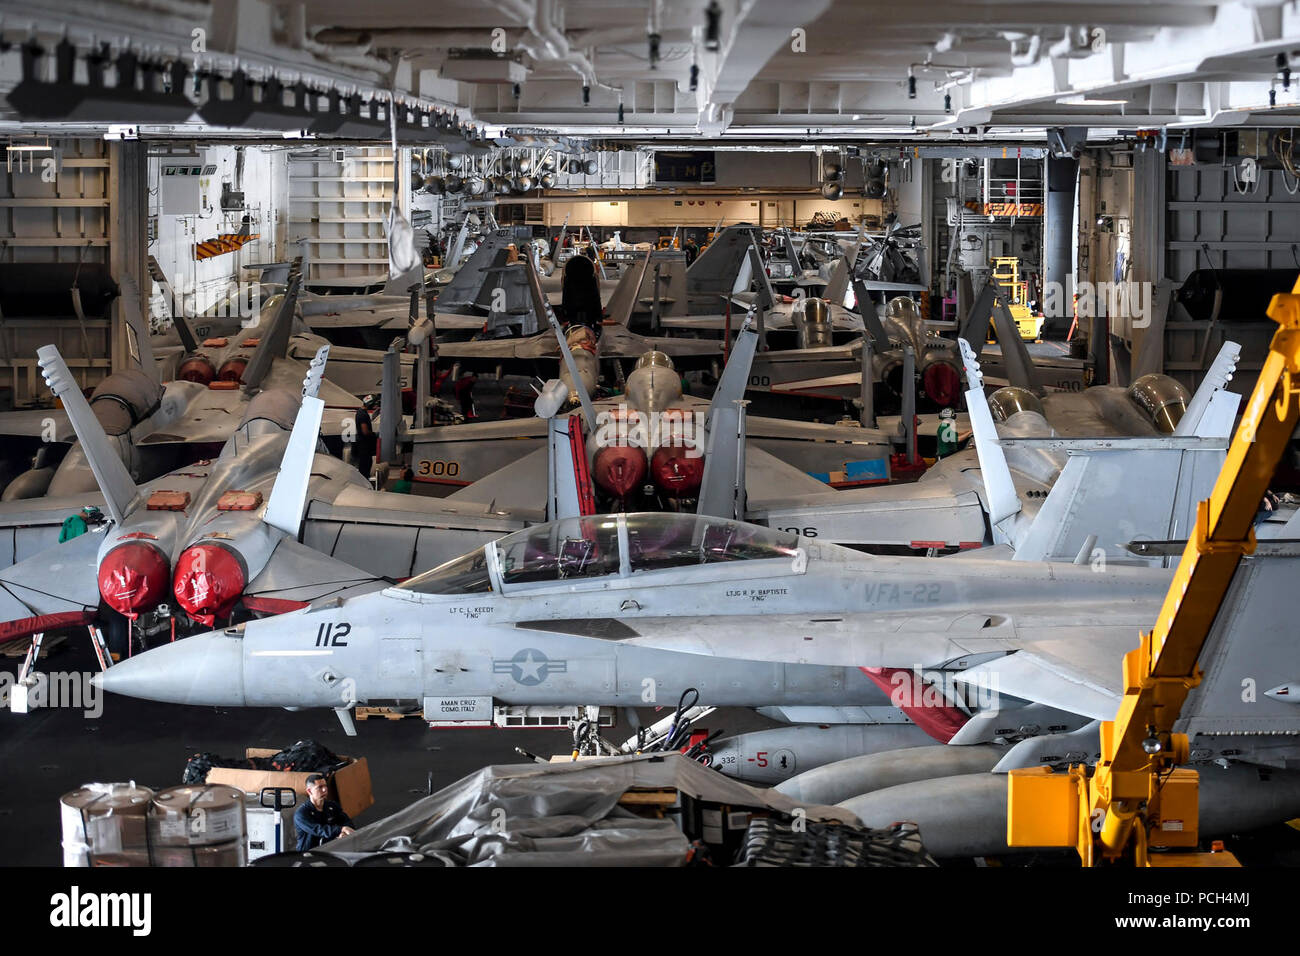 PACIFIC OCEAN (April 17, 2018) Aircraft sit in the hangar bay of the aircraft carrier USS Theodore Roosevelt (CVN 71). Theodore Roosevelt is underway for a regularly scheduled deployment in the U.S. 7th Fleet area of operations in support of maritime security operations and theater security cooperation efforts. Stock Photo